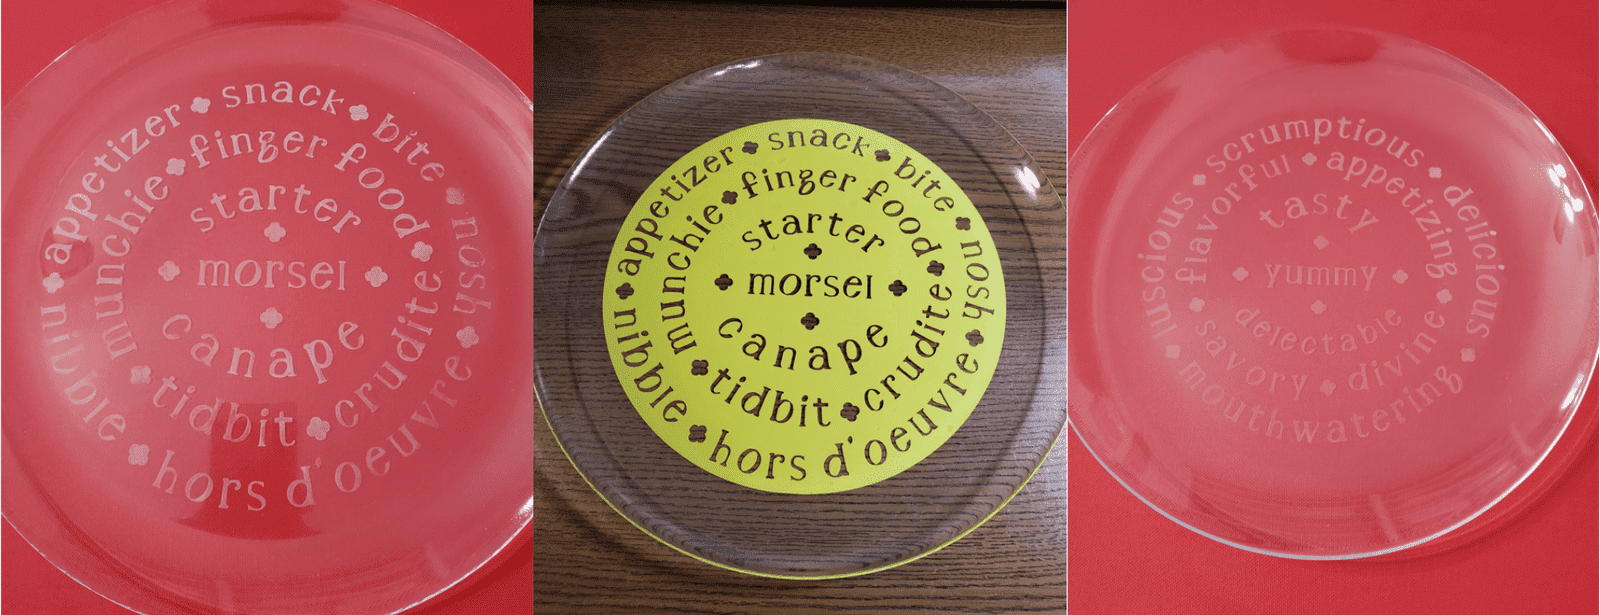 Etched Glass Snack Plates Using a Vinyl Stencil